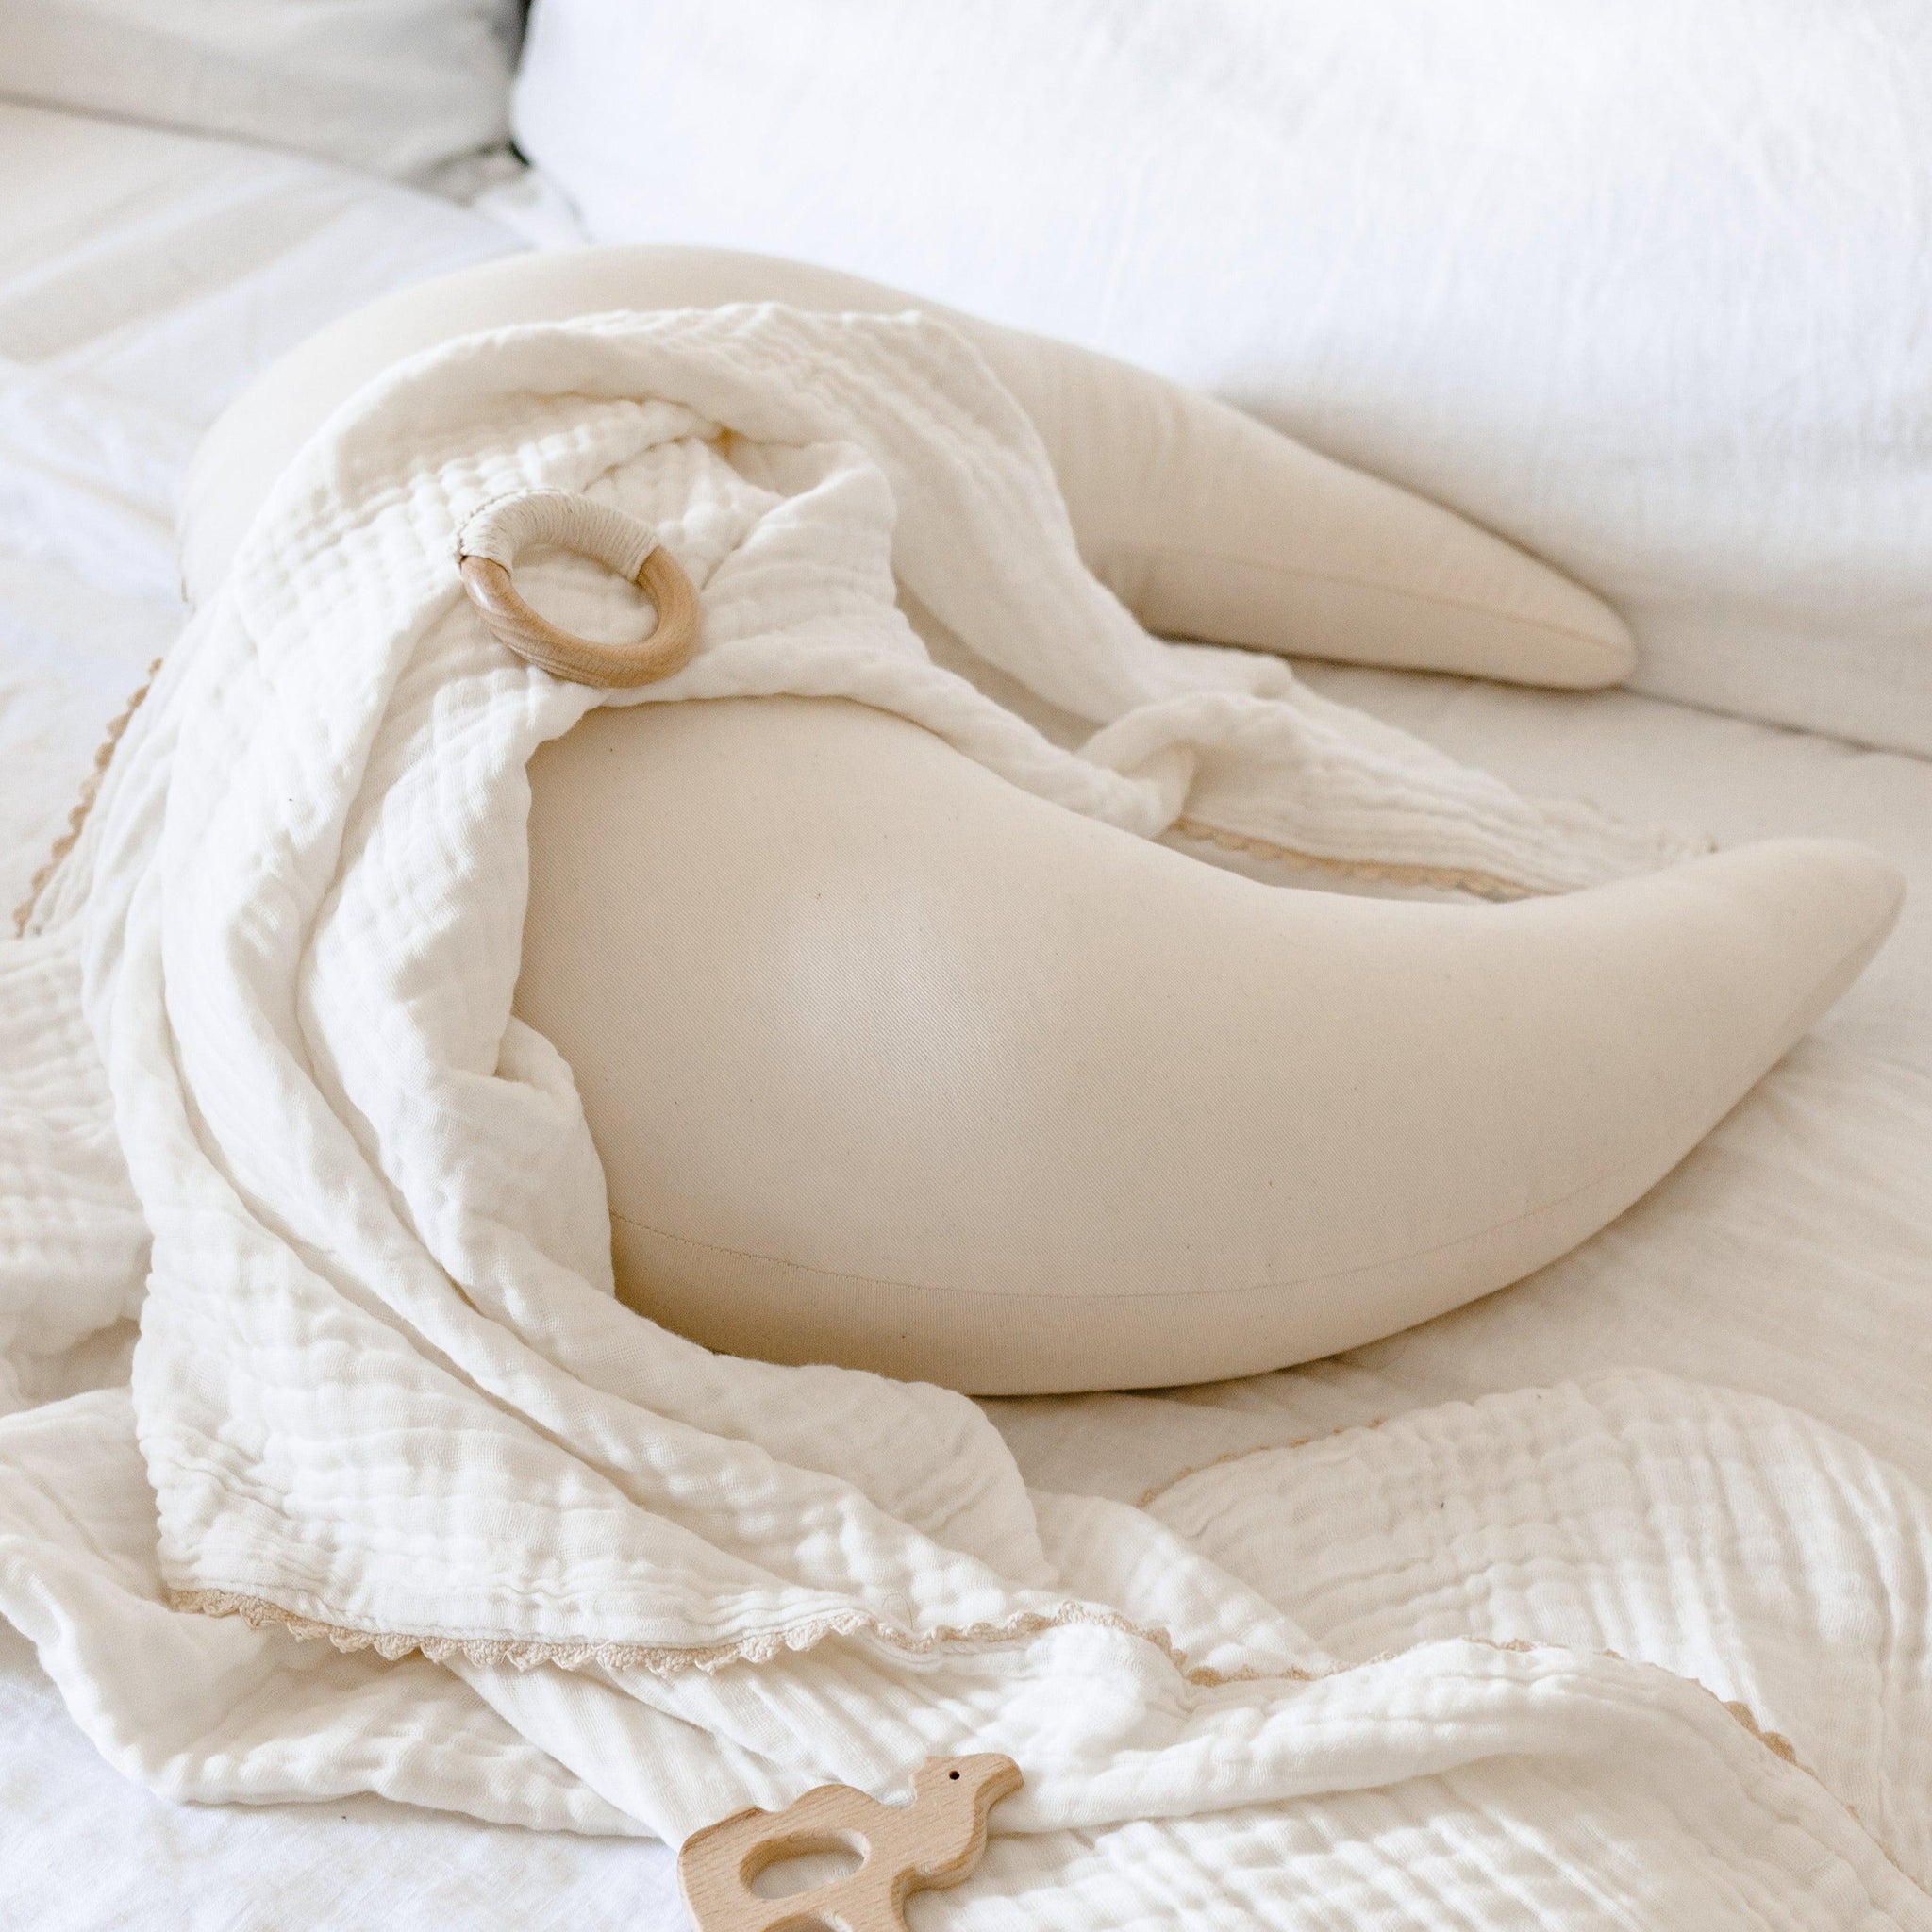 Snuggle Me swaddle blanket - ivory with natural reviews.